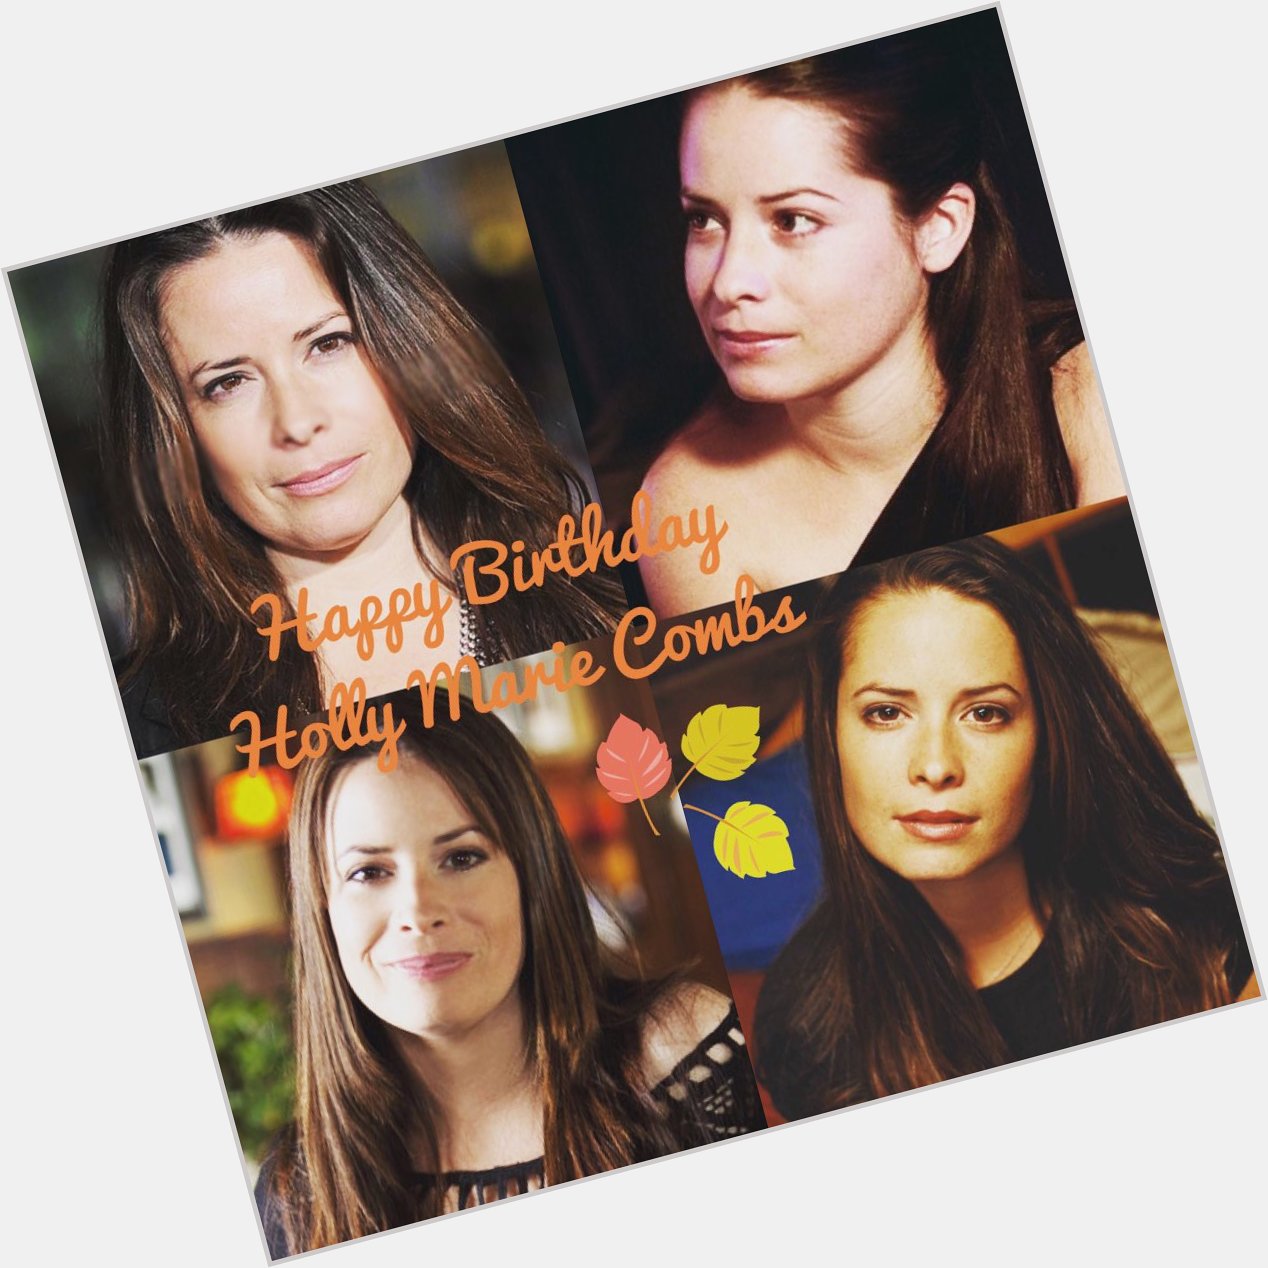 HAPPY BIRTHDAY TO THE SWEET AND BEAUTIFUL HOLLY MARIE COMBS!! I Hope You Had An Amazing Birthday    